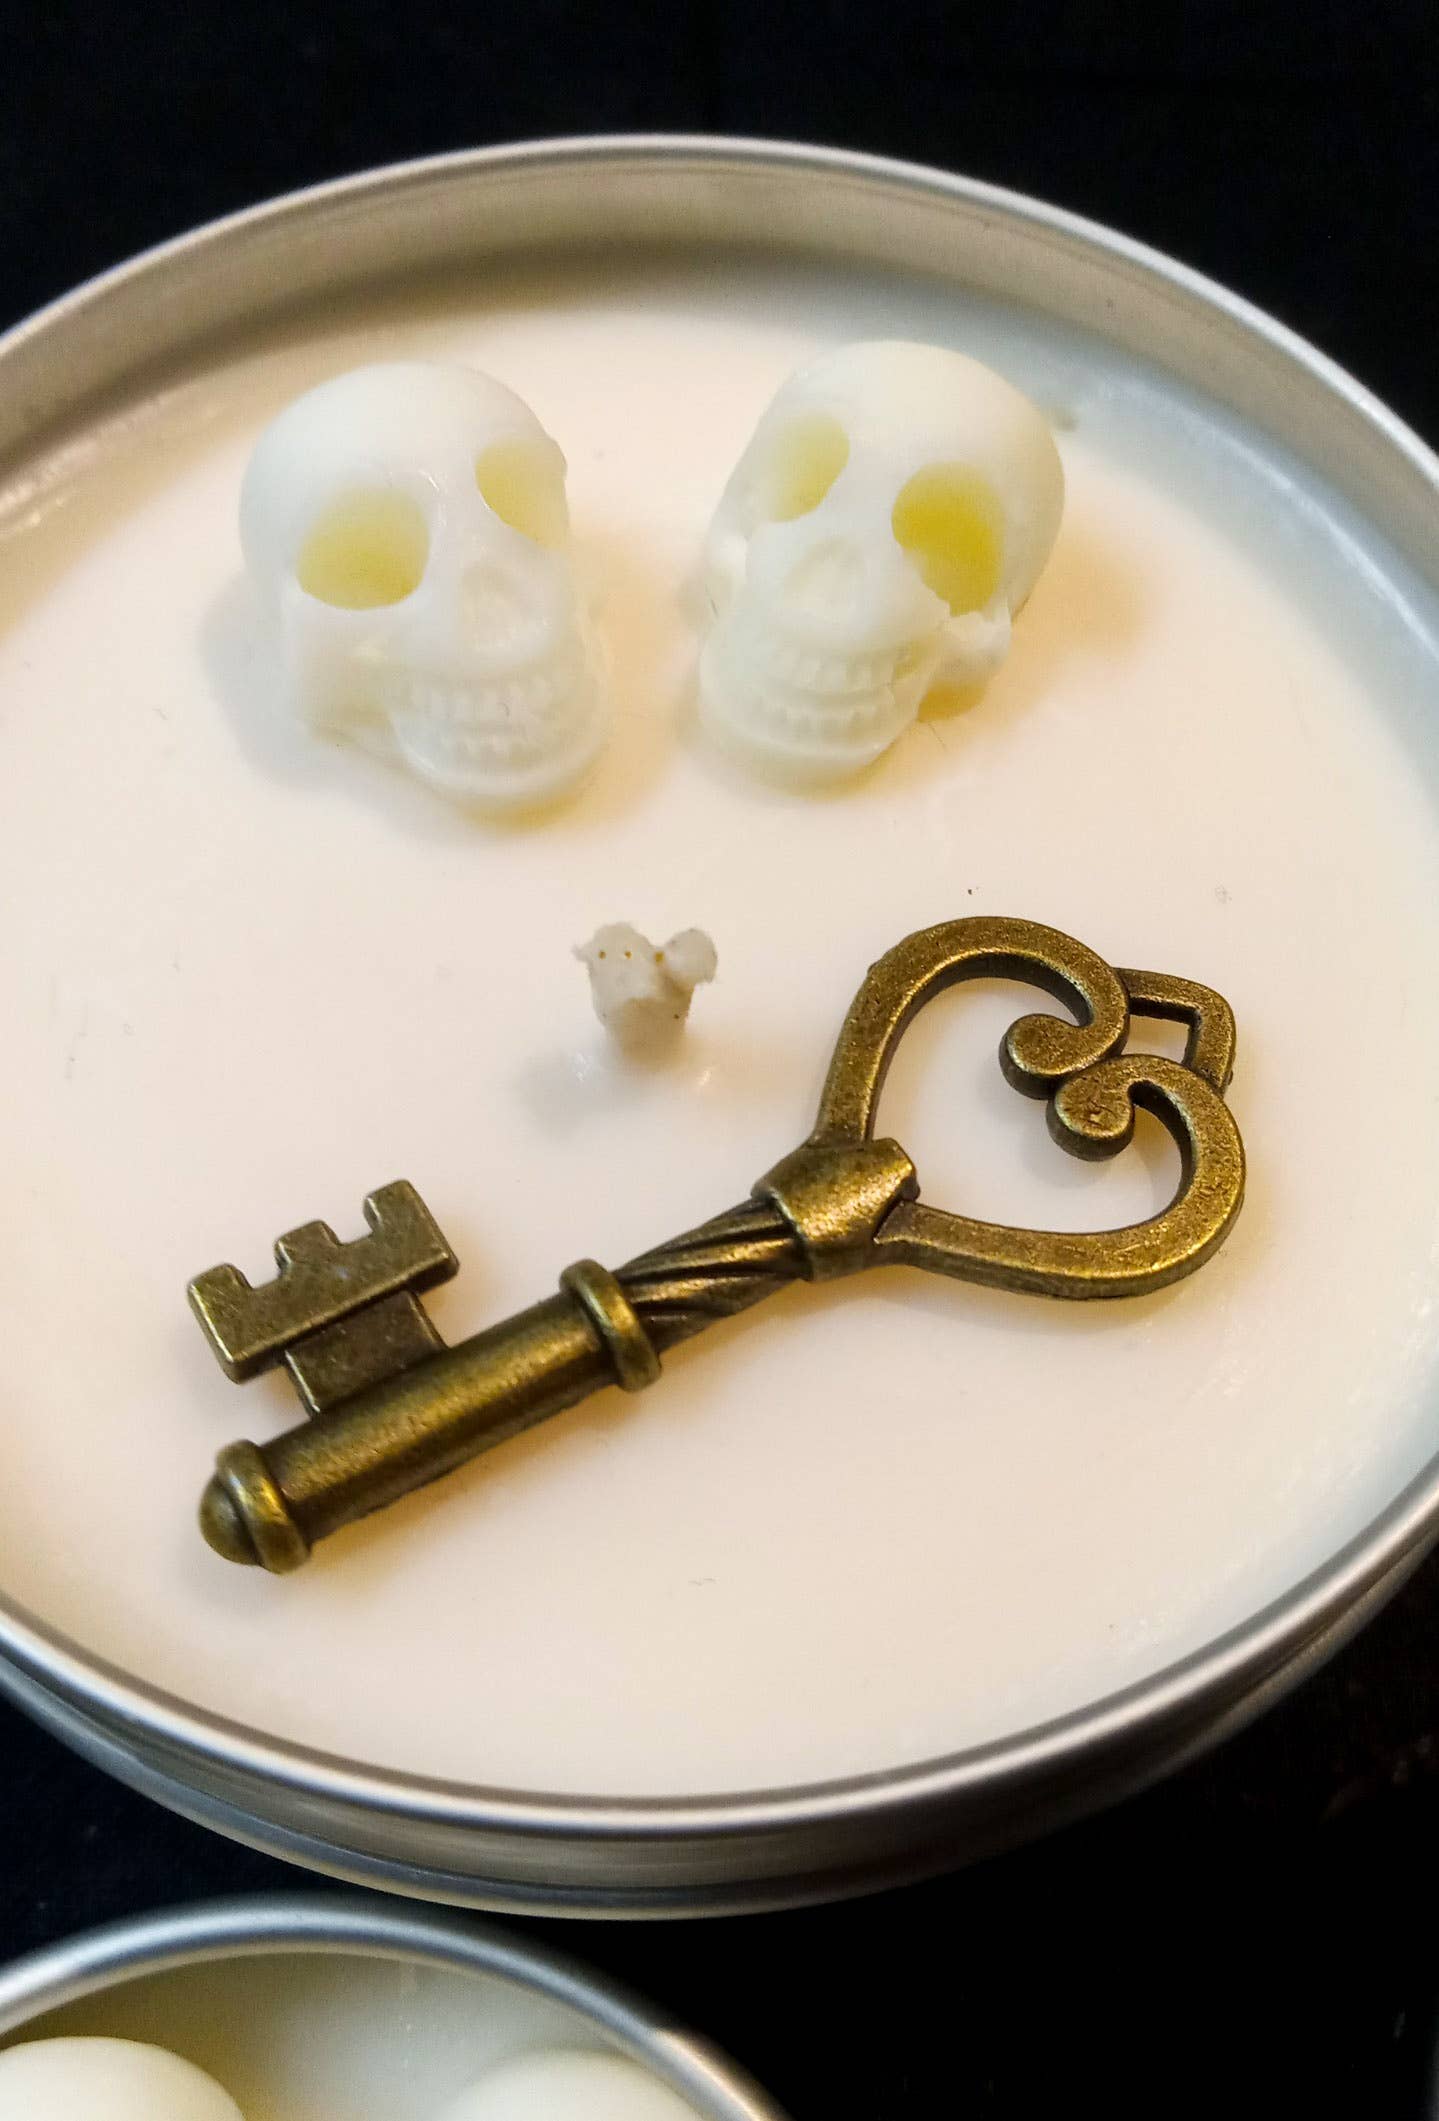 Key To My Heart skull candle: 2 oz / Love spell